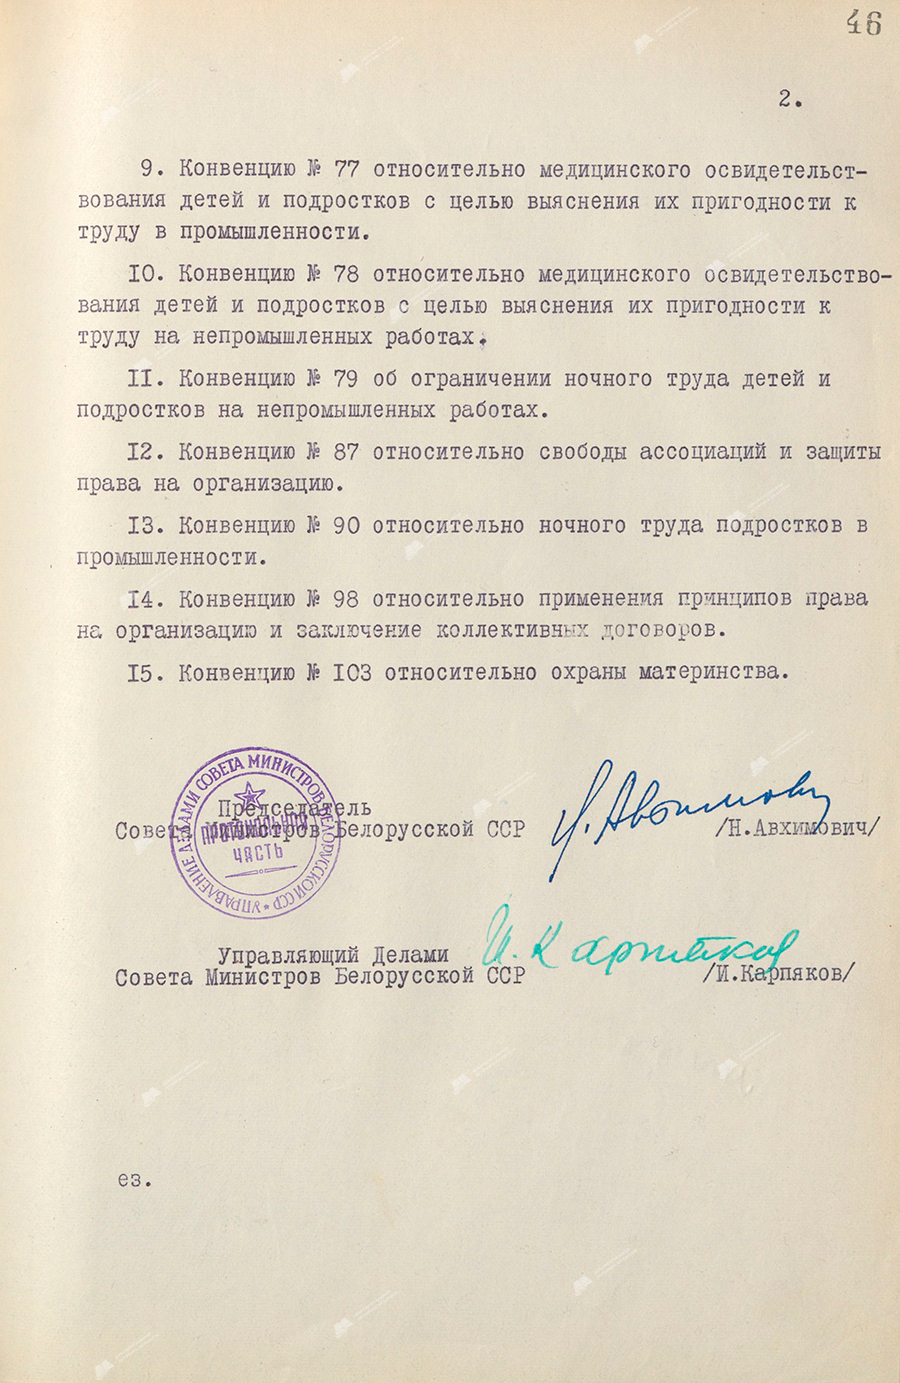 Resolution No. 433 of the Council of Ministers of the Byelorussian SSR «On approval of the conventions of the International Labor Organization (ILO)»-стр. 1